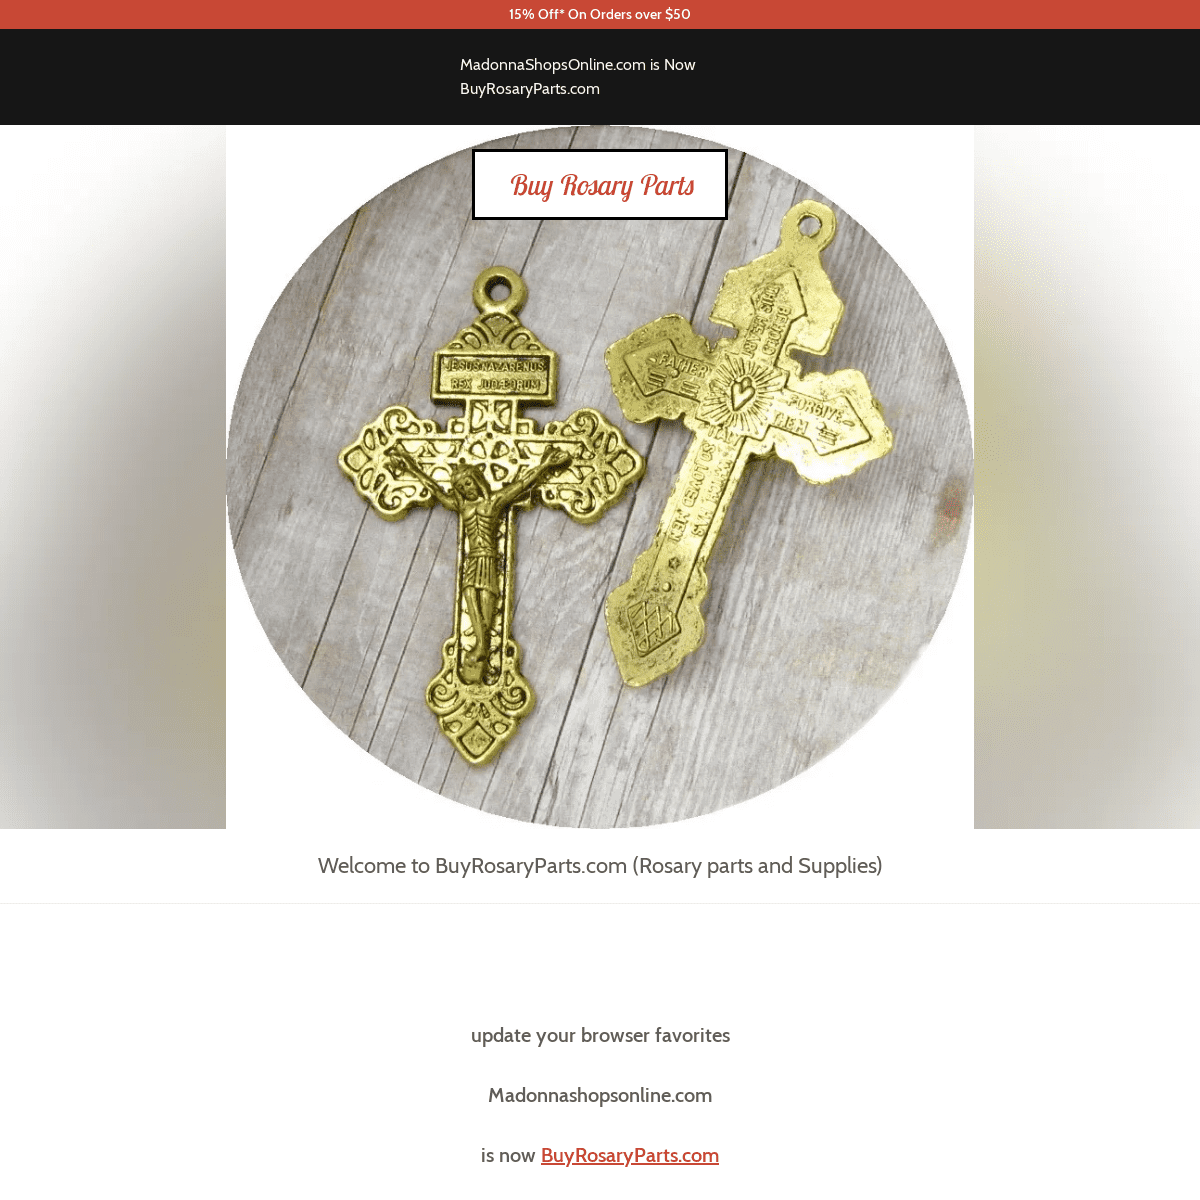 Rosary Parts and Catholic Supplies